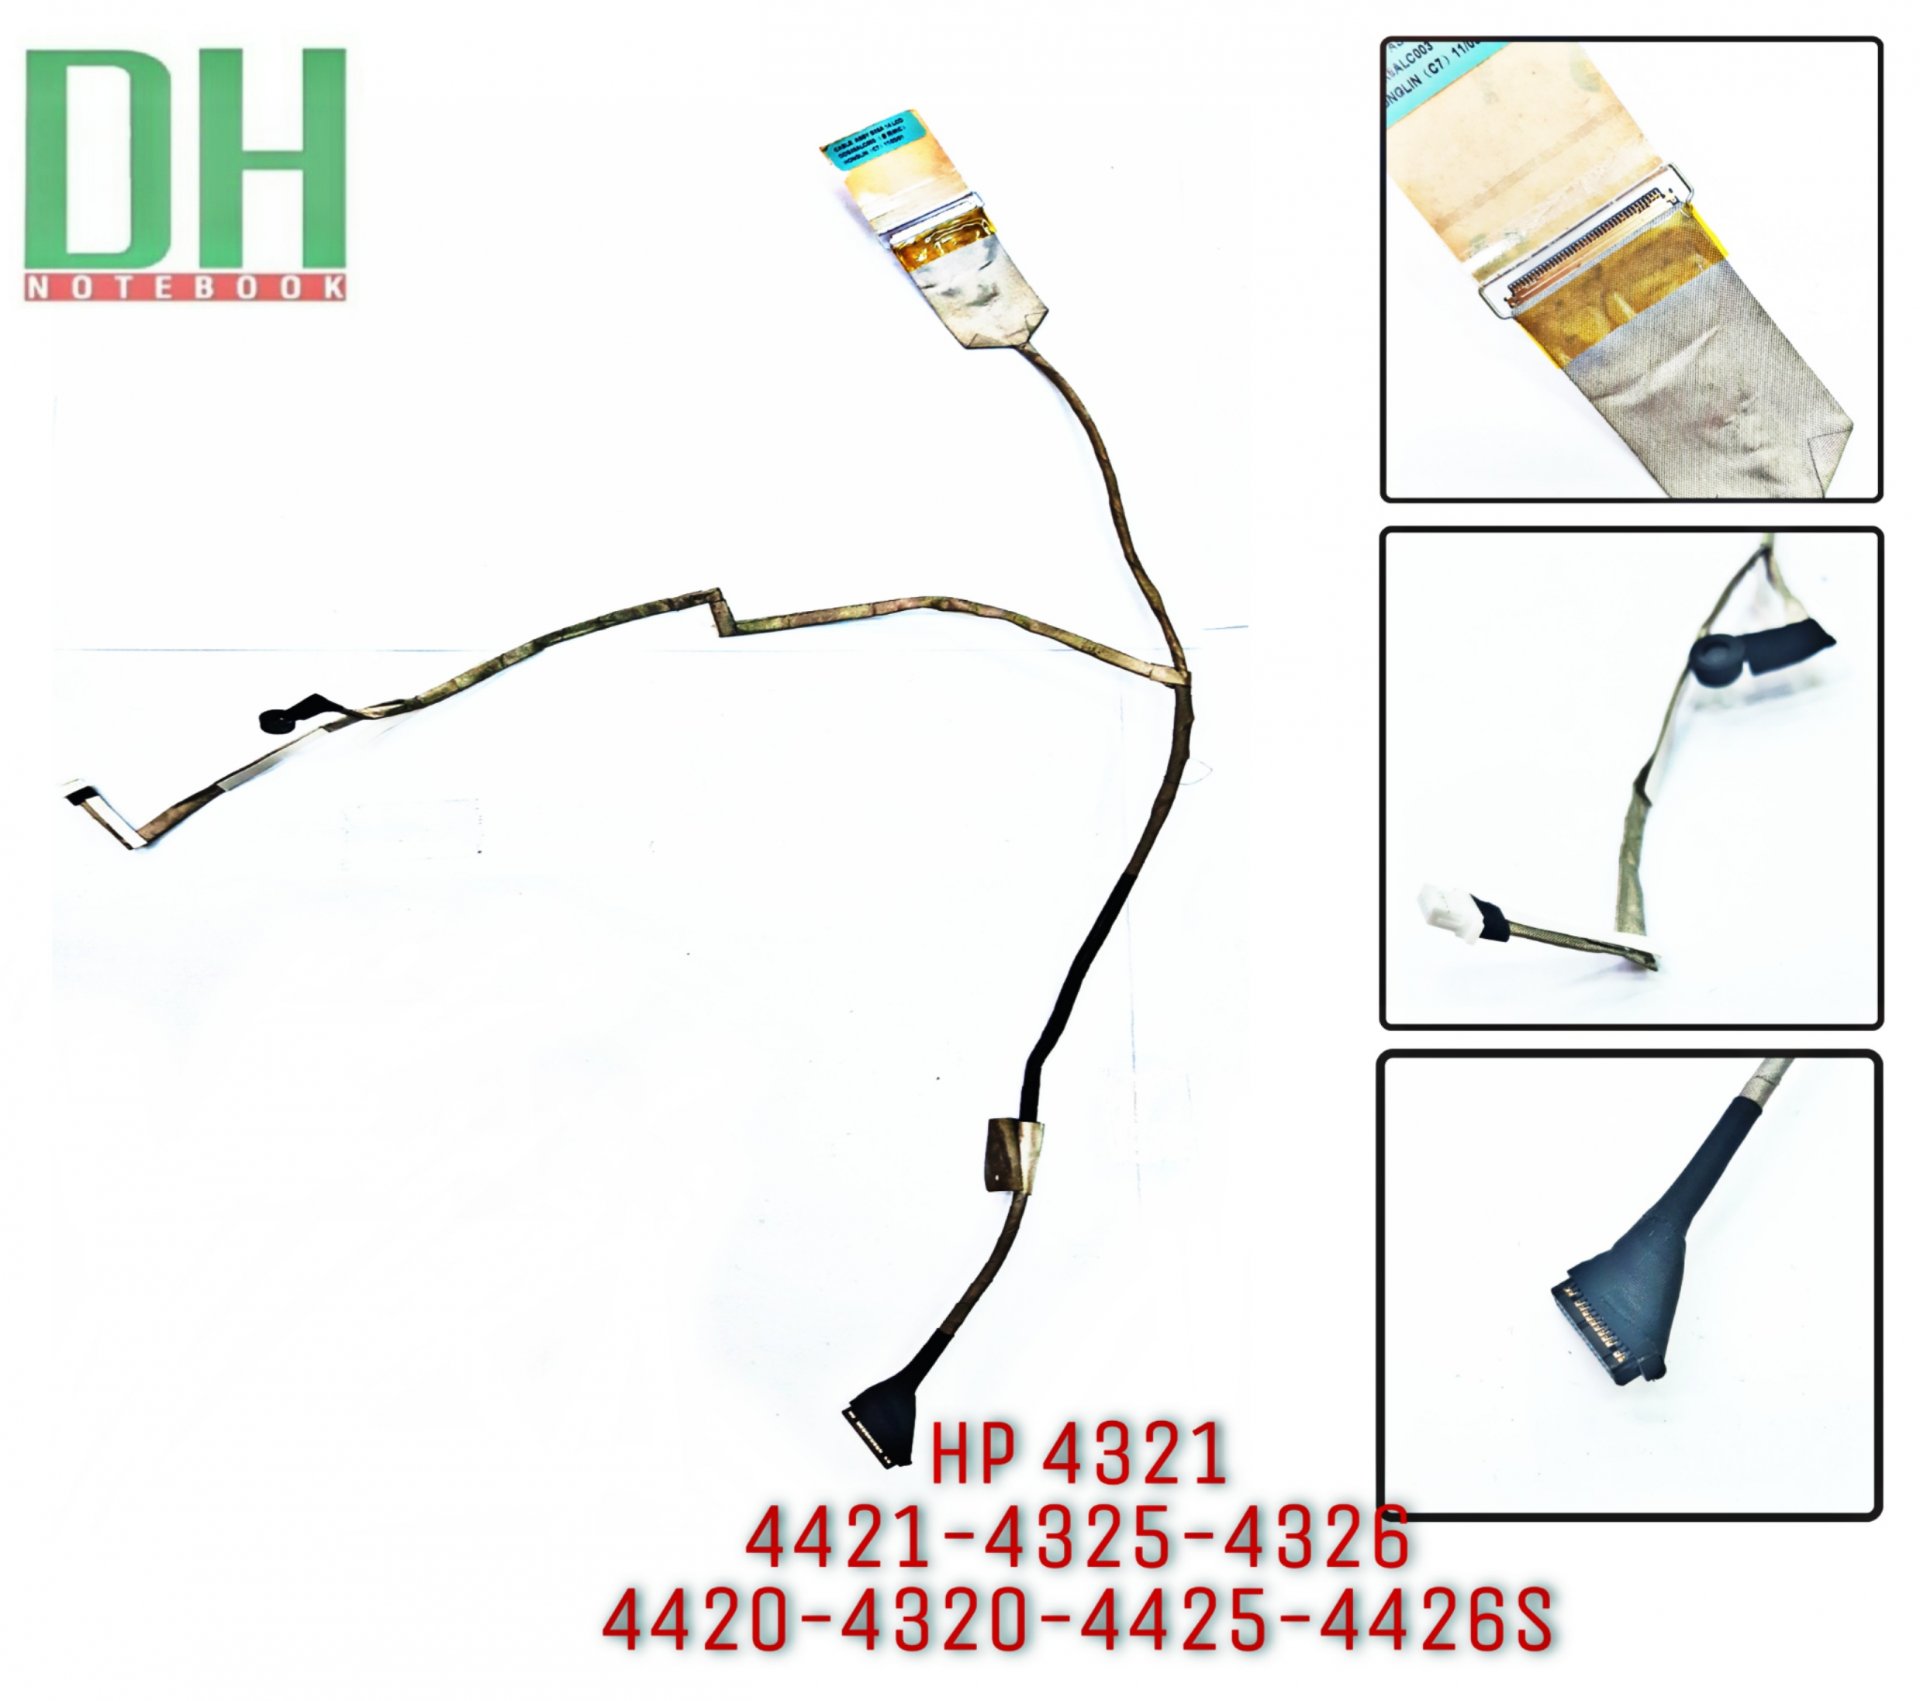 HP 4321 Video Cable